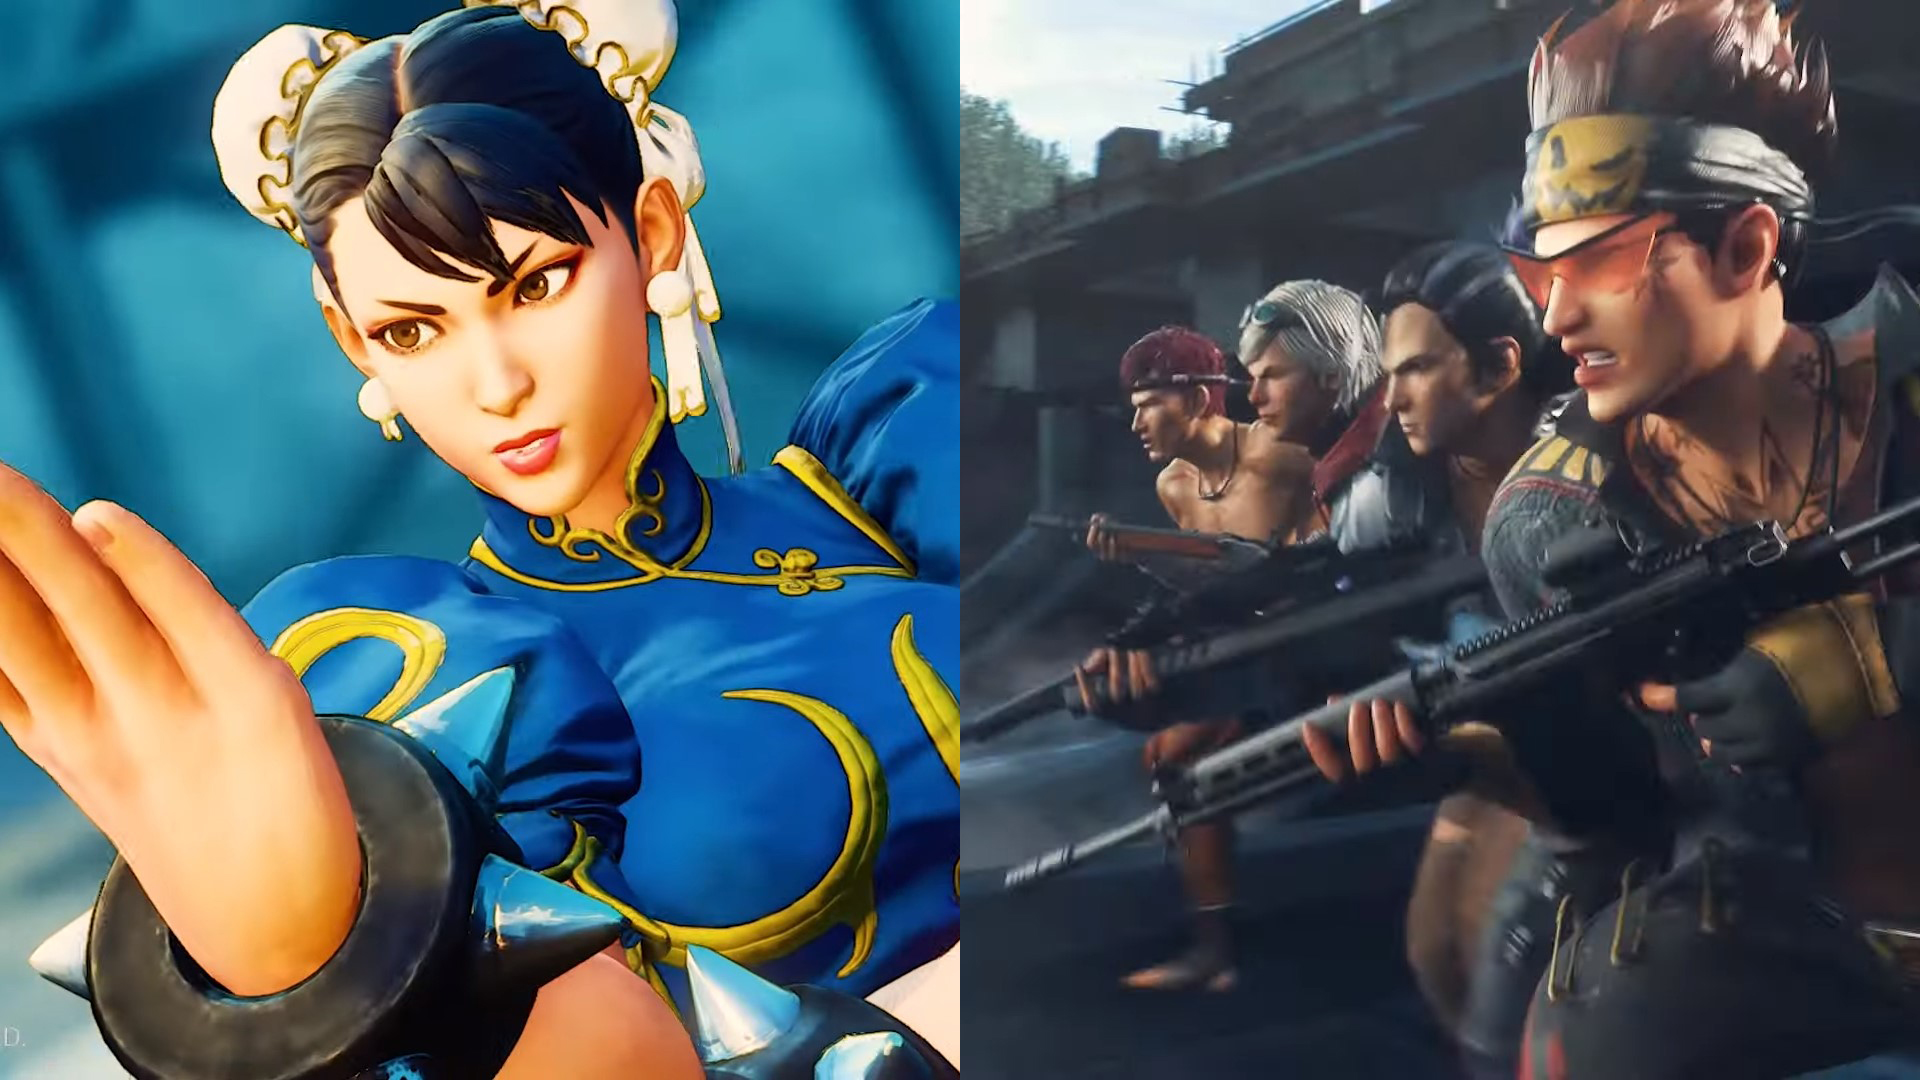 Two More Street Fighter Characters Are Dropping Into Fortnite Soon